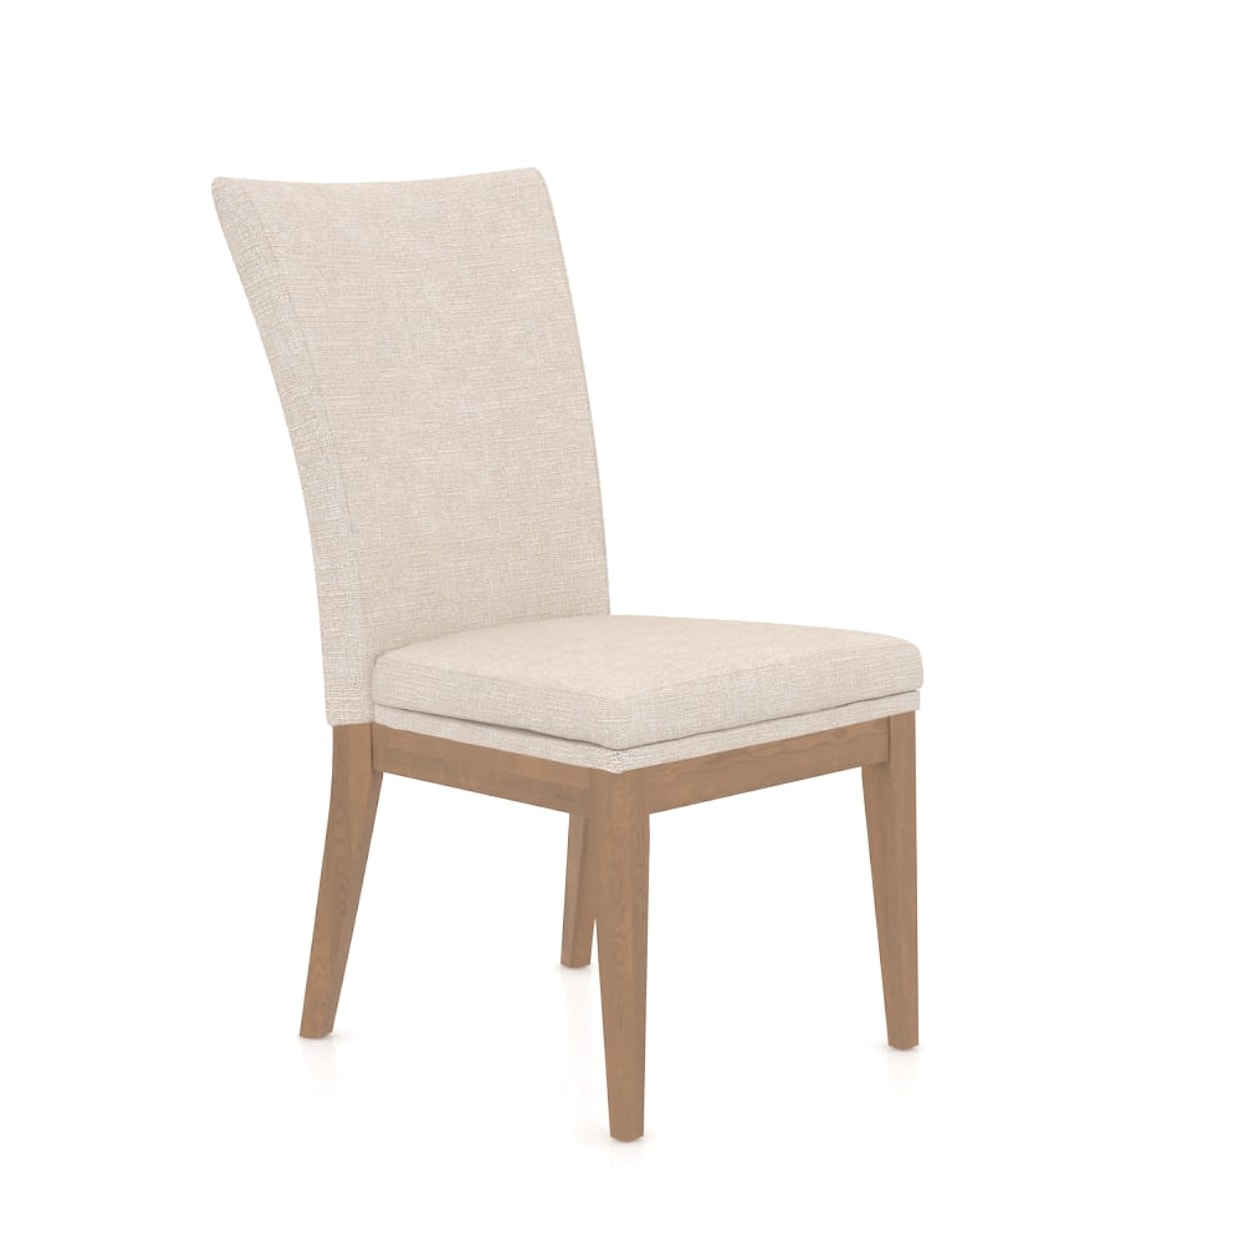 Canadel Canadel Core CUSTOMIZABLE UPHOLSTERED CHAIR